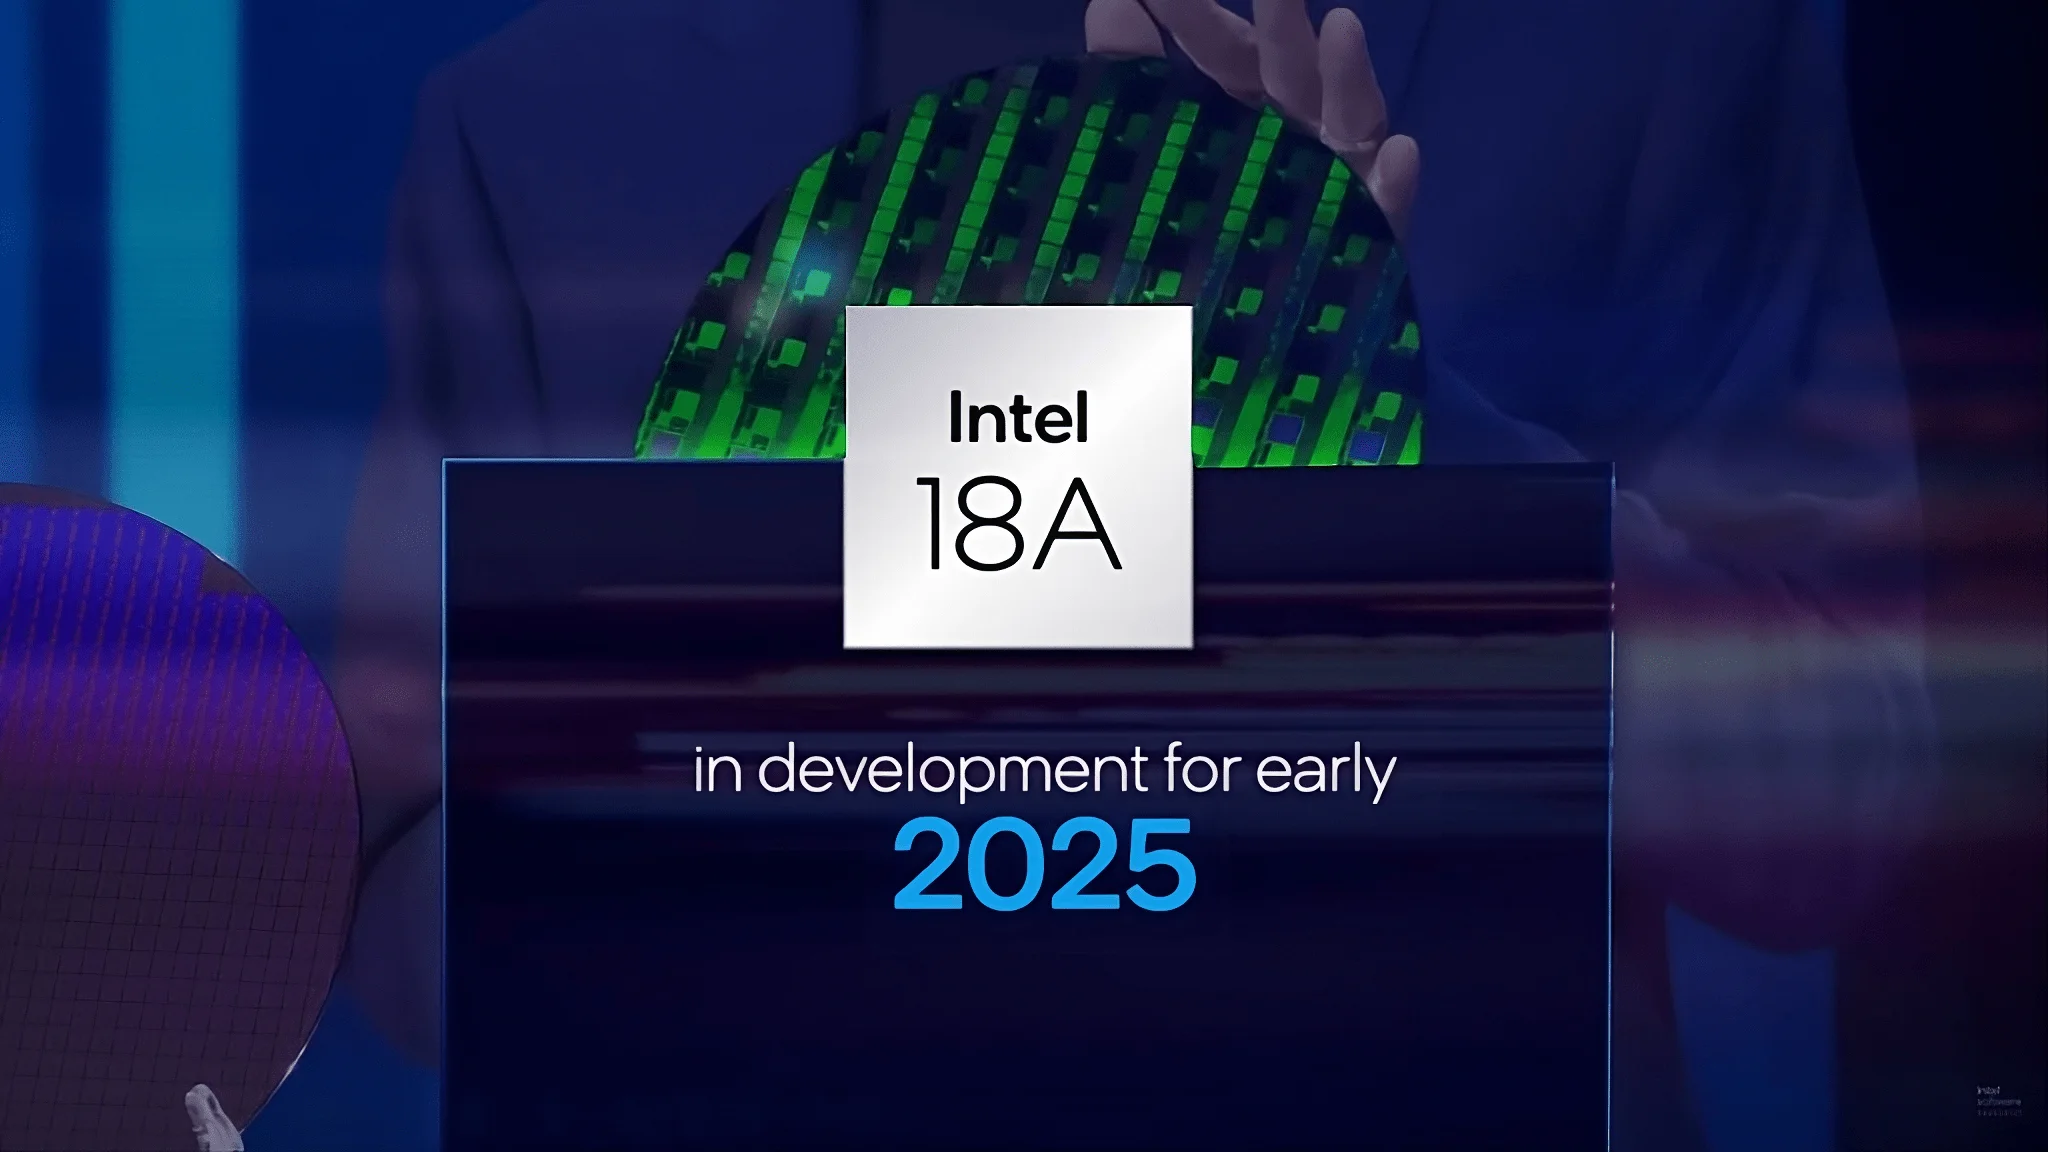 Faraday Announces Intel 18A Based ARM Neoverse Processors